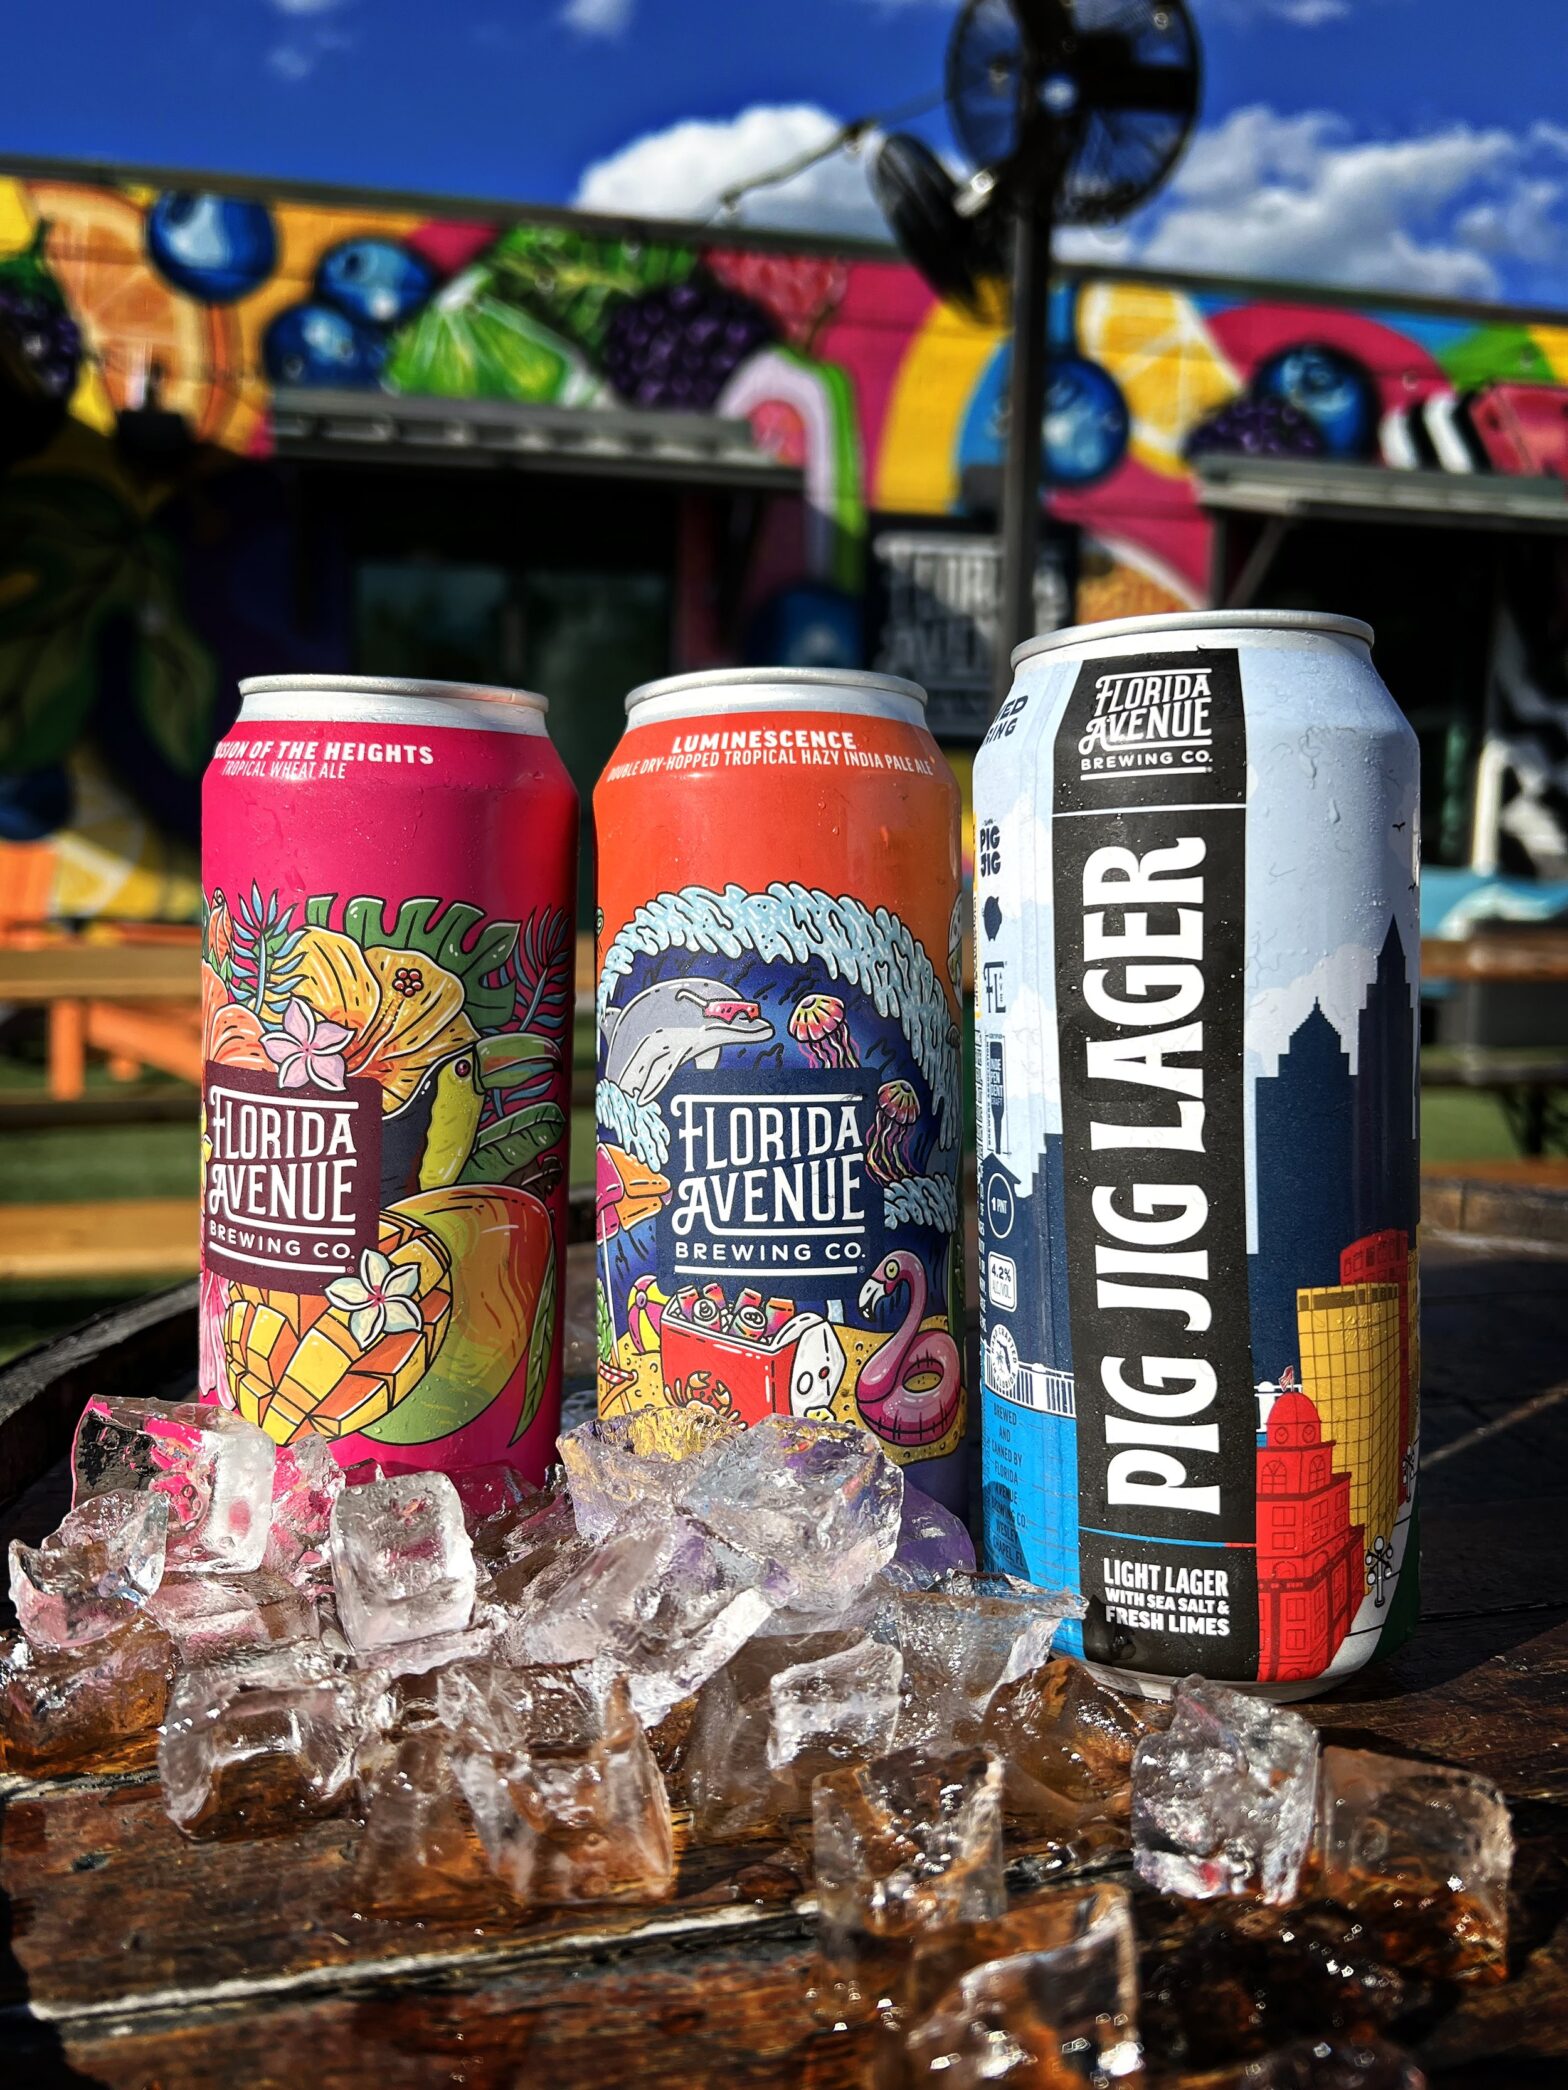 Florida Avenue Brewing Co. Pig Jig Lager cans to hit stores before event